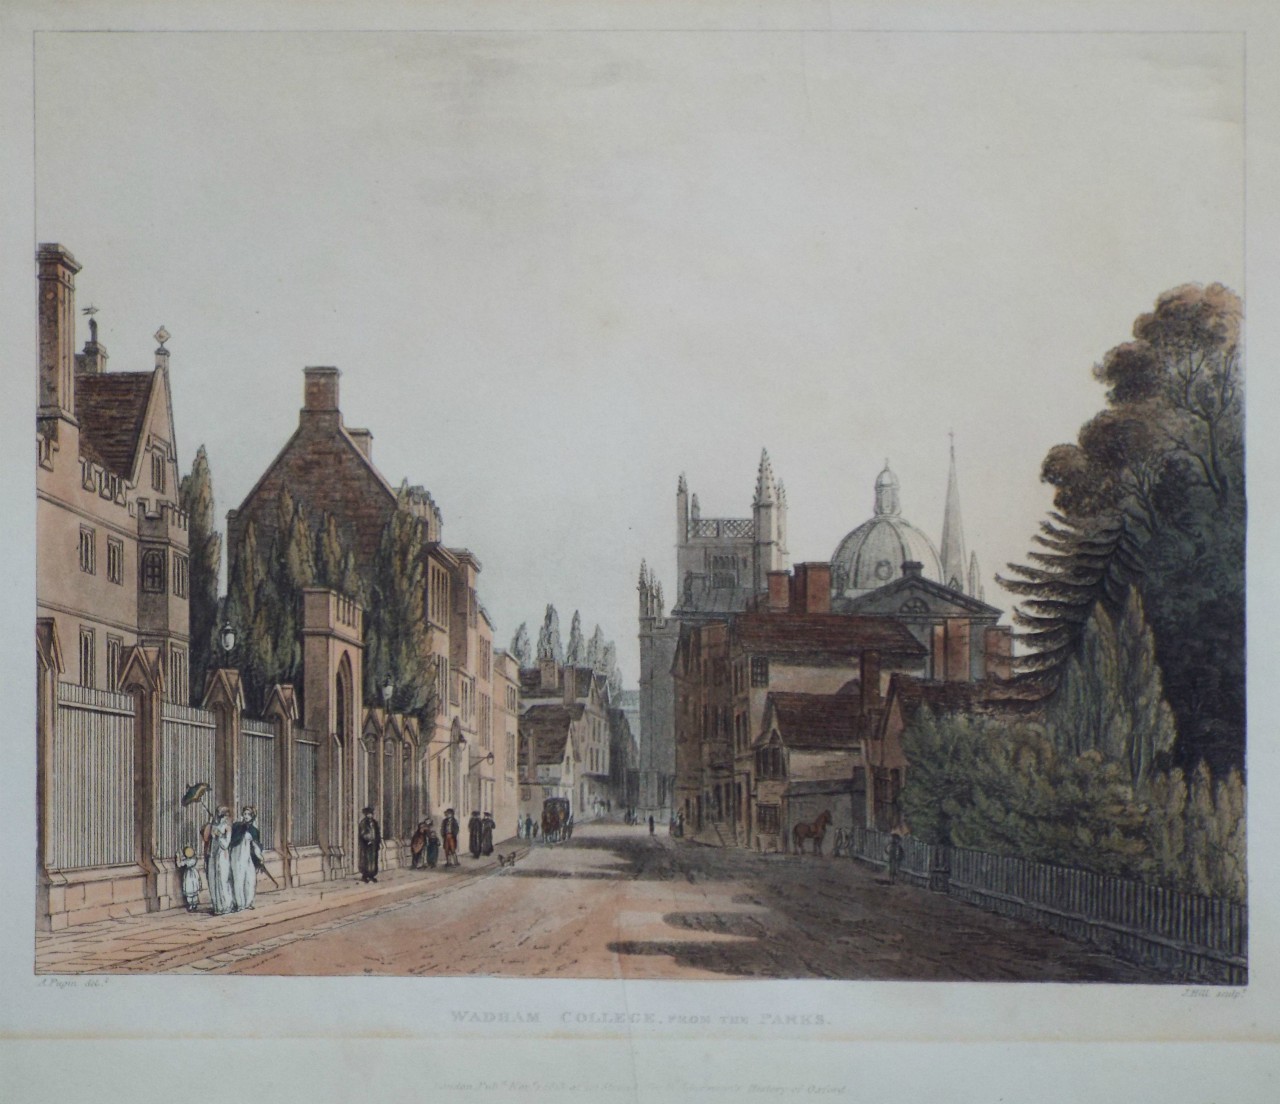 Aquatint - Wadham College, from the Parks. - Hill